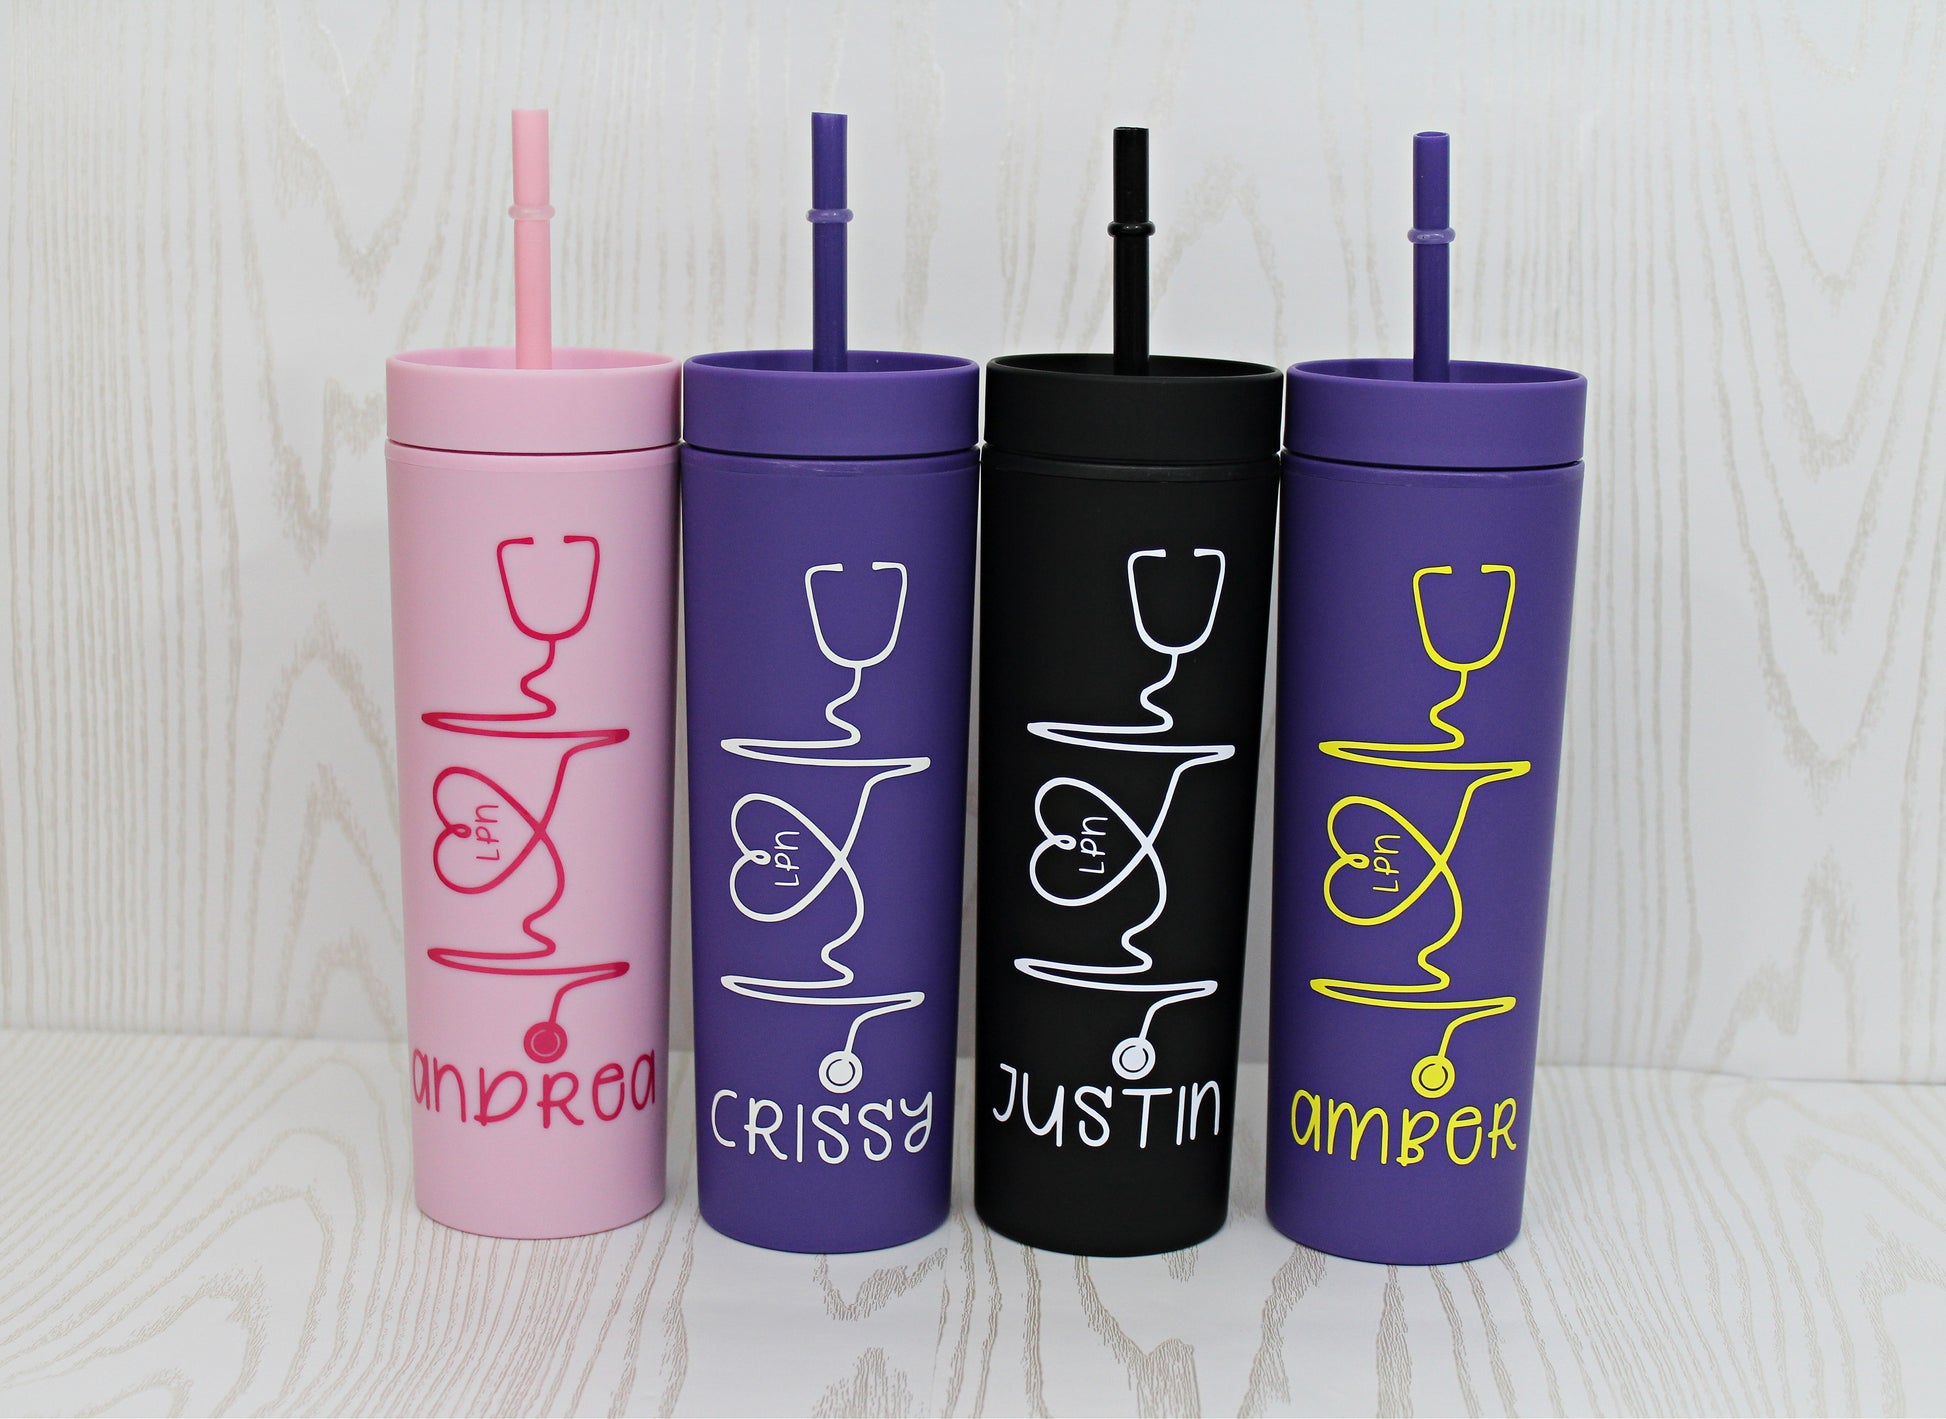 Nurse Life New Version - Personalized Acrylic Tumbler With Straw